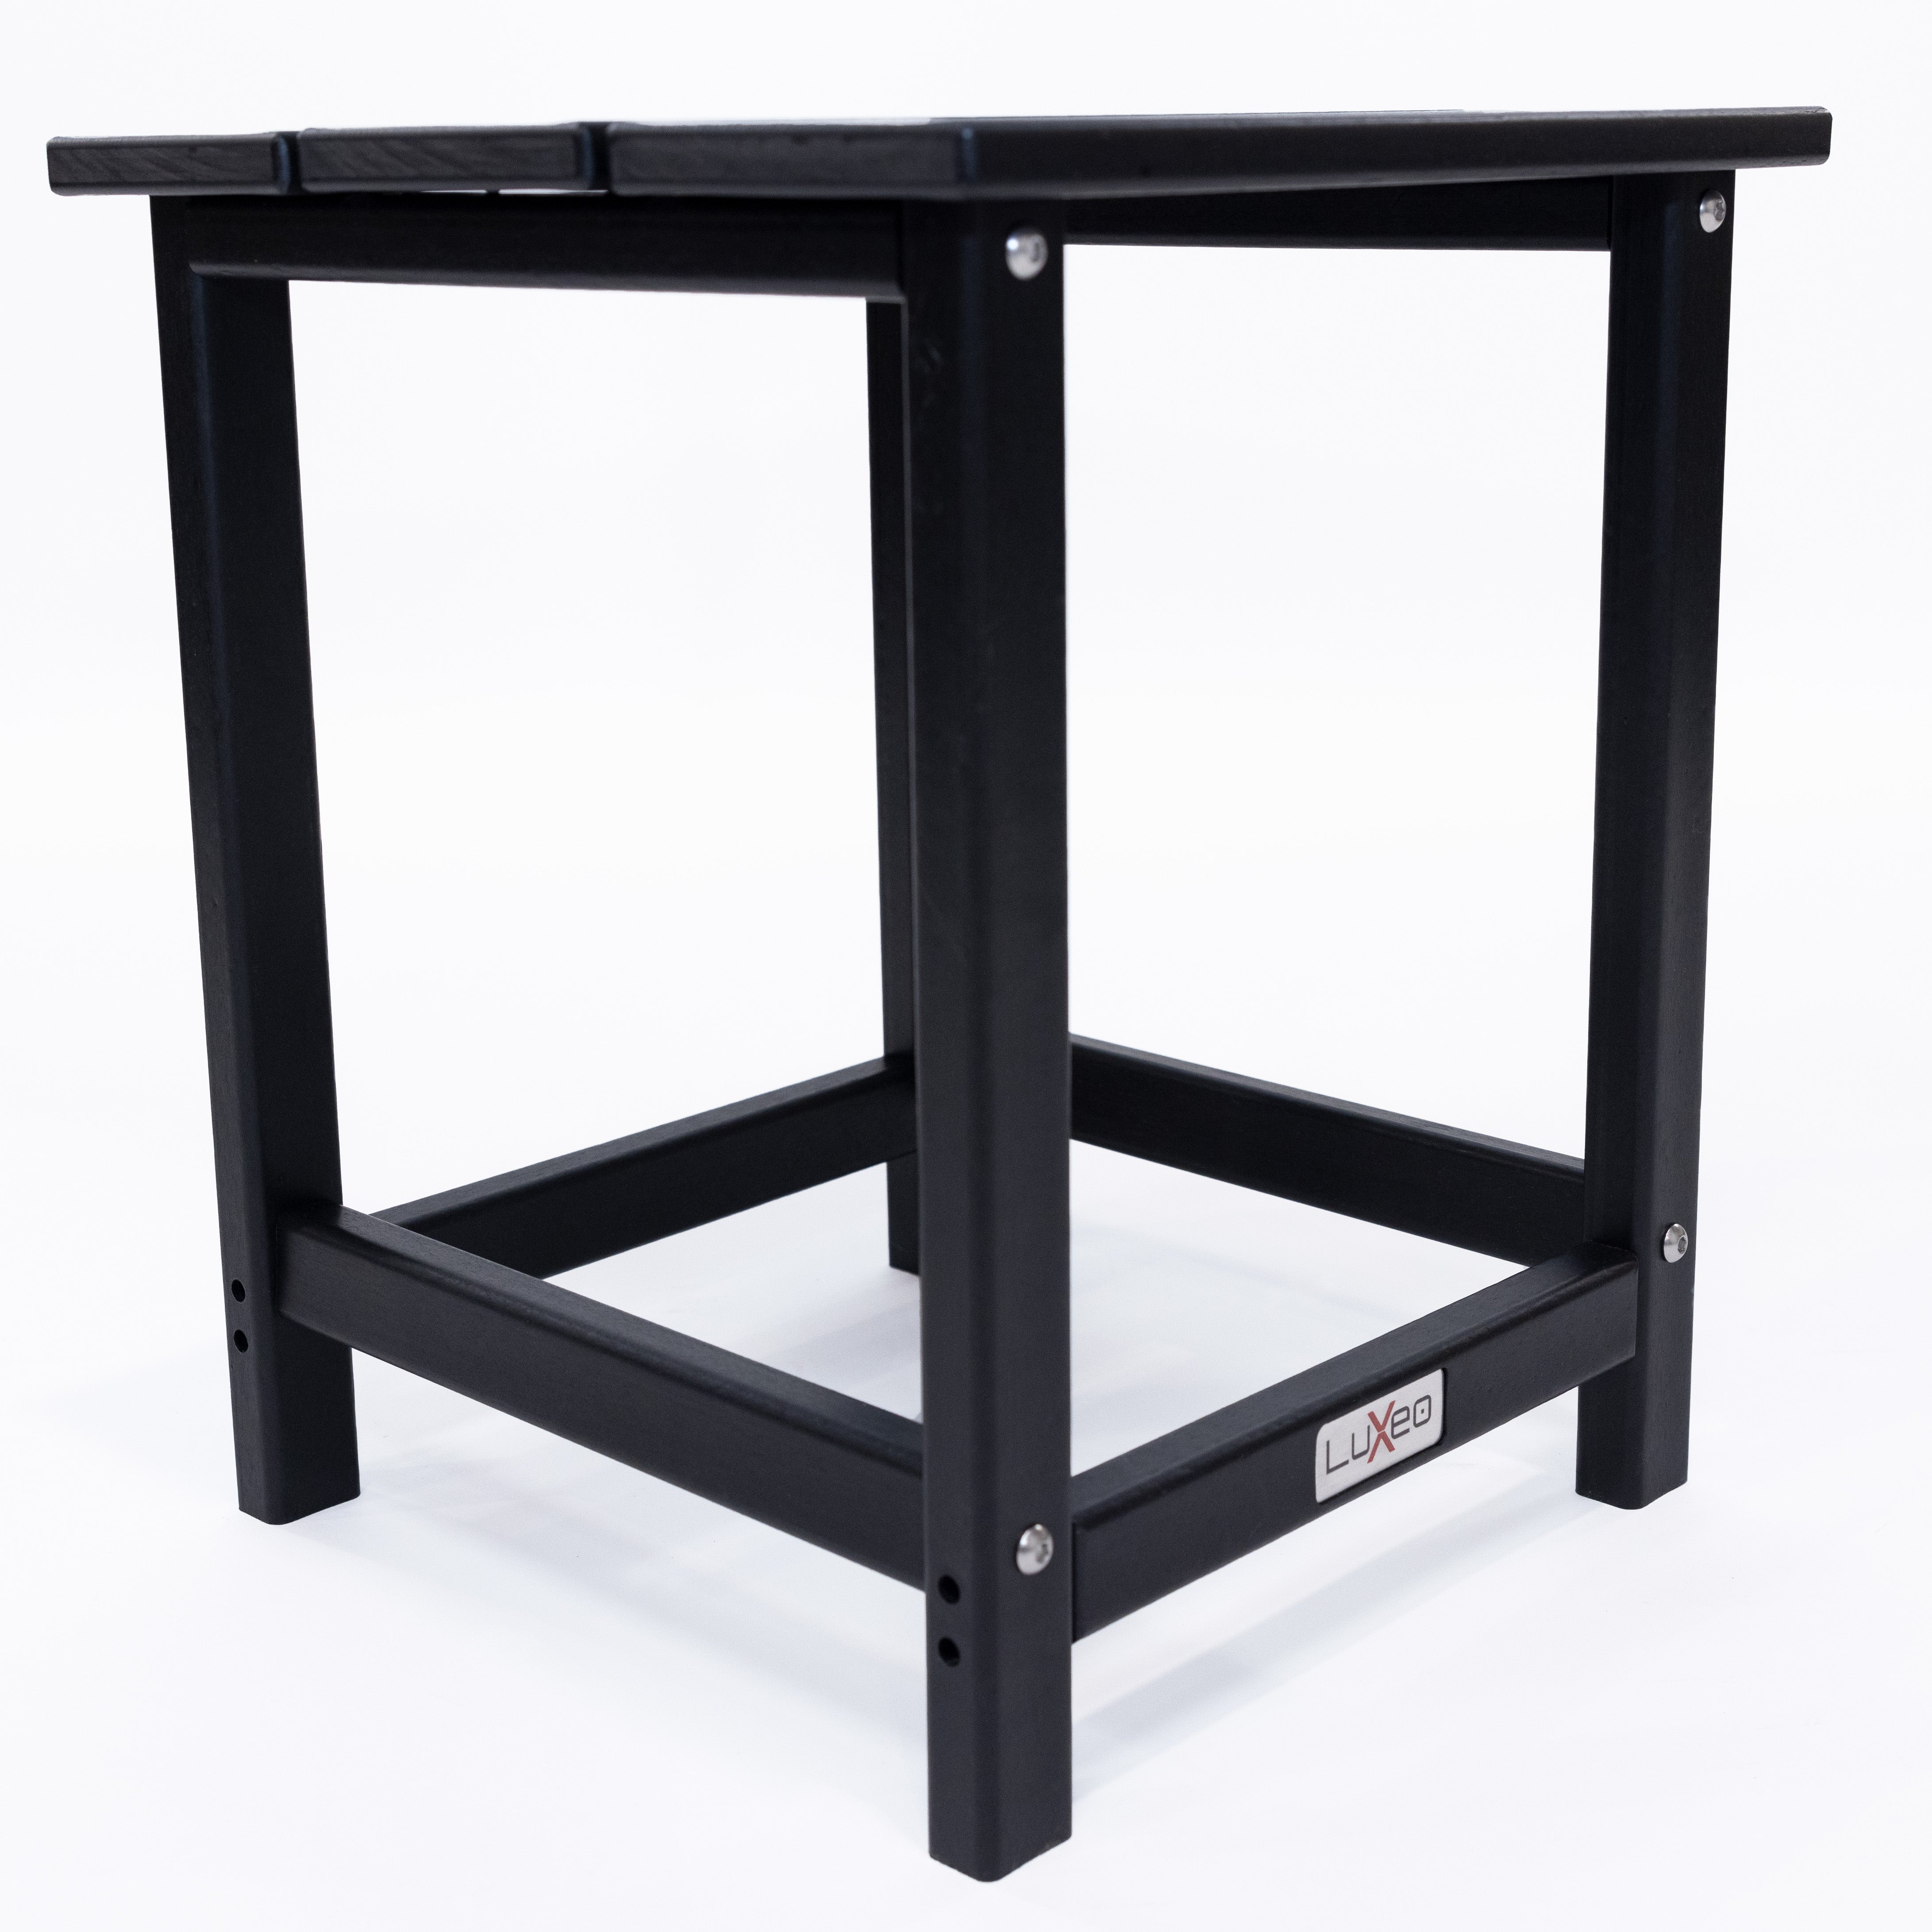 Vista Recycled HDPE Plastic Side Table